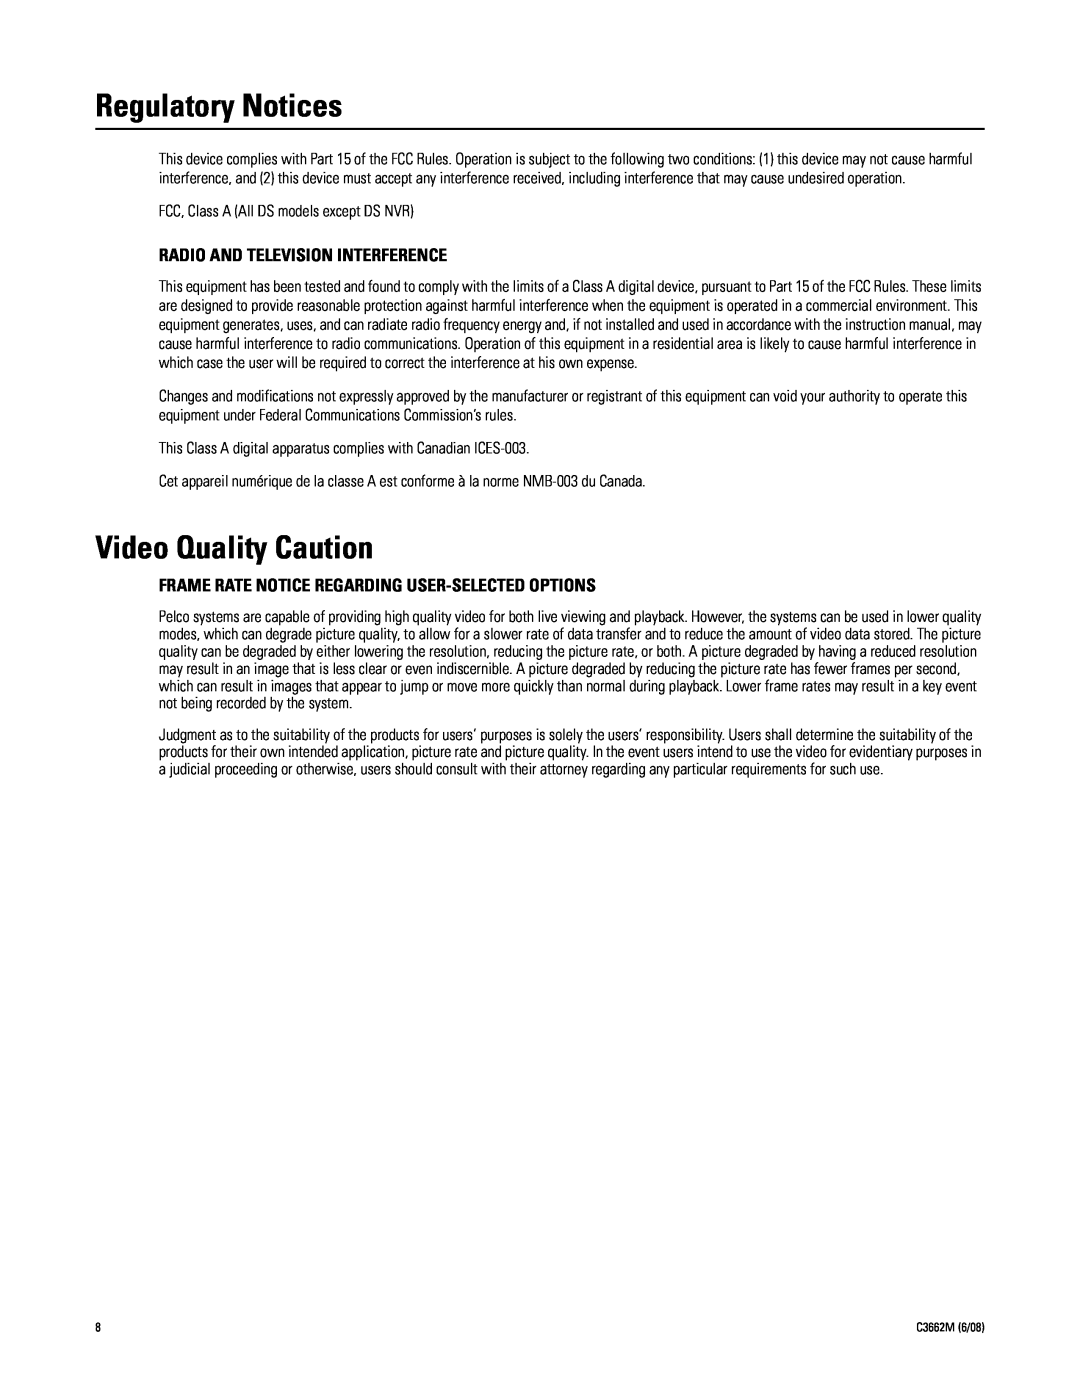 Pelco C3662M installation manual Regulatory Notices, Video Quality Caution, Radio And Television Interference 